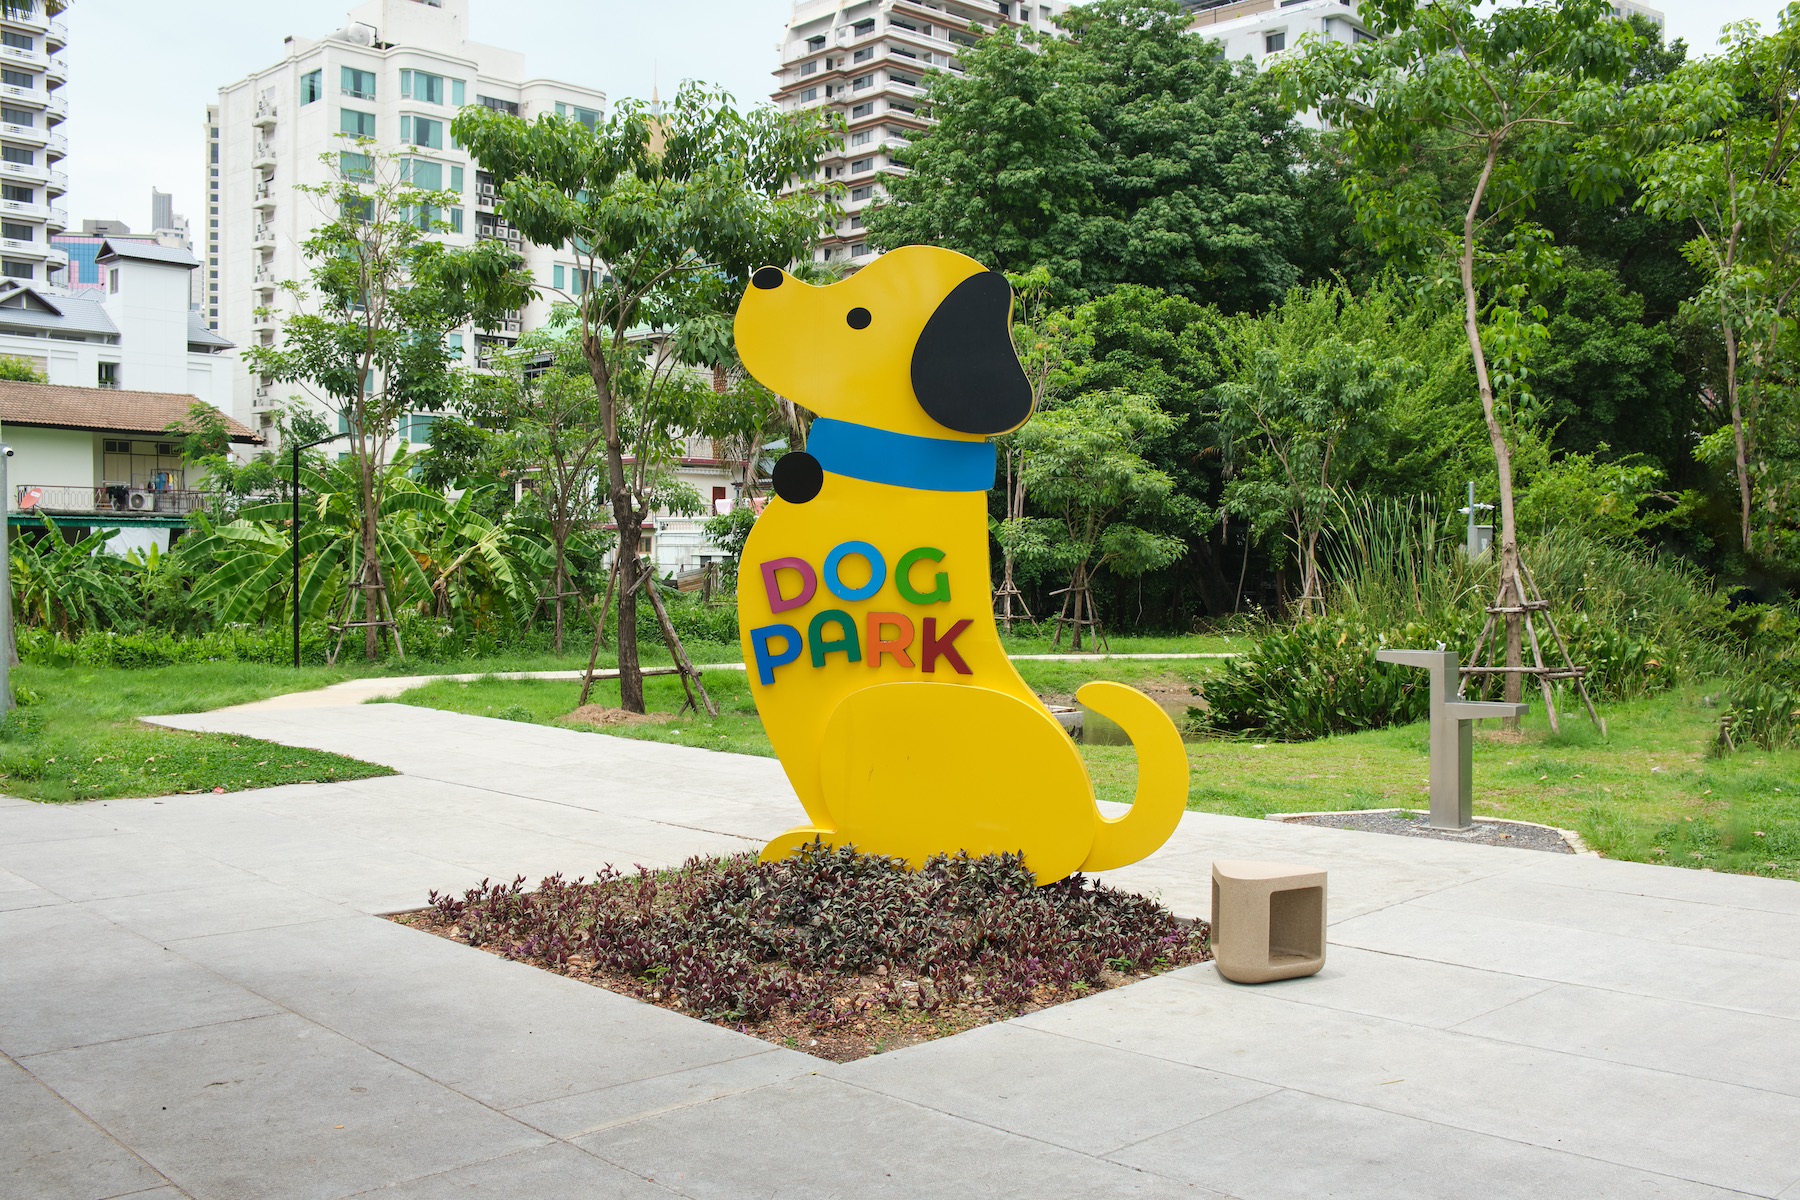 The entrance to a dog park in Benjakitti Park, Bangkok, Thailand is marked by a large dog-shaped sign